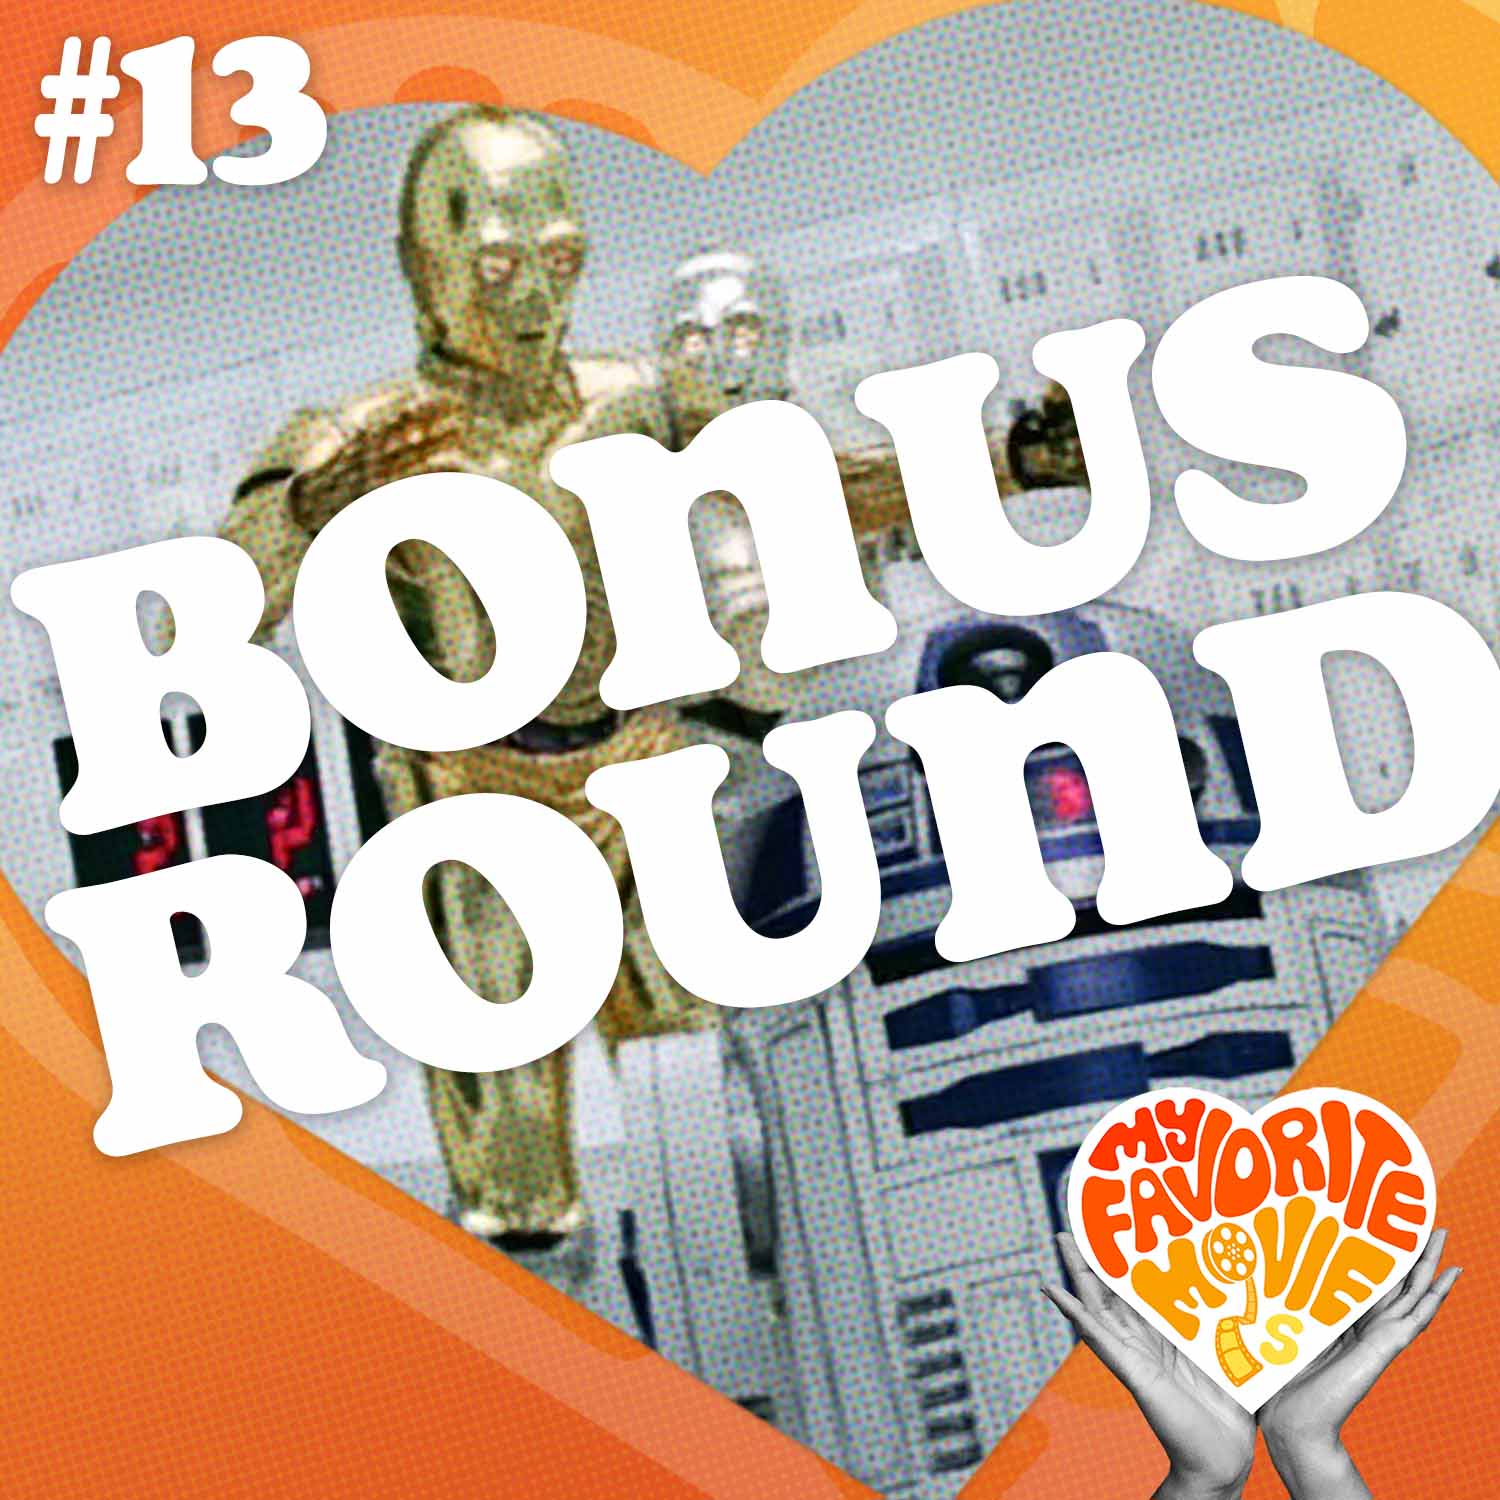 "R2D2 knows what's up!" (with Michael Tucker) | Episode 13 BONUS ROUND